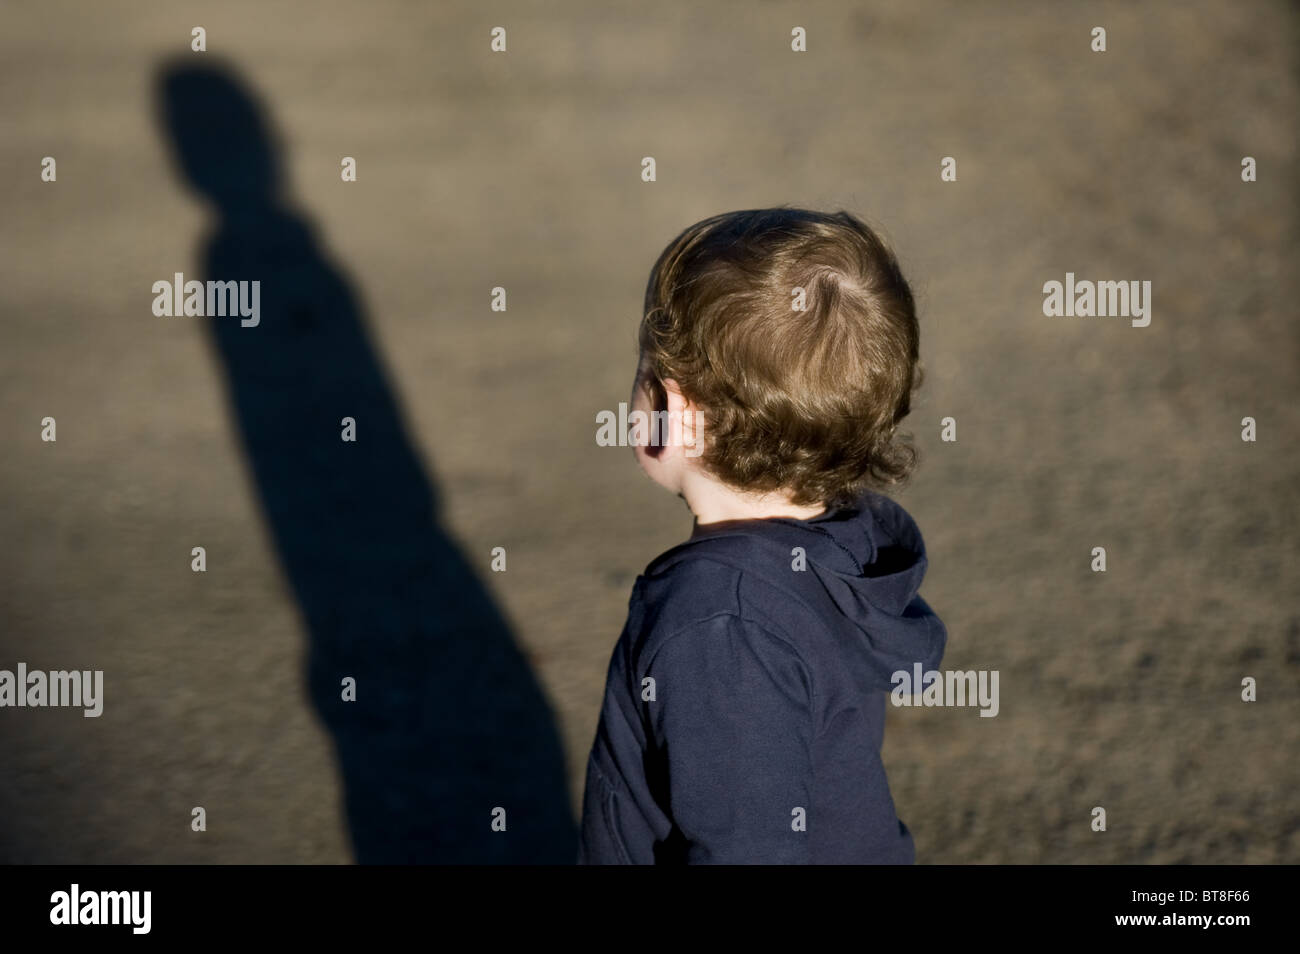 Child cast a long shadow Stock Photo